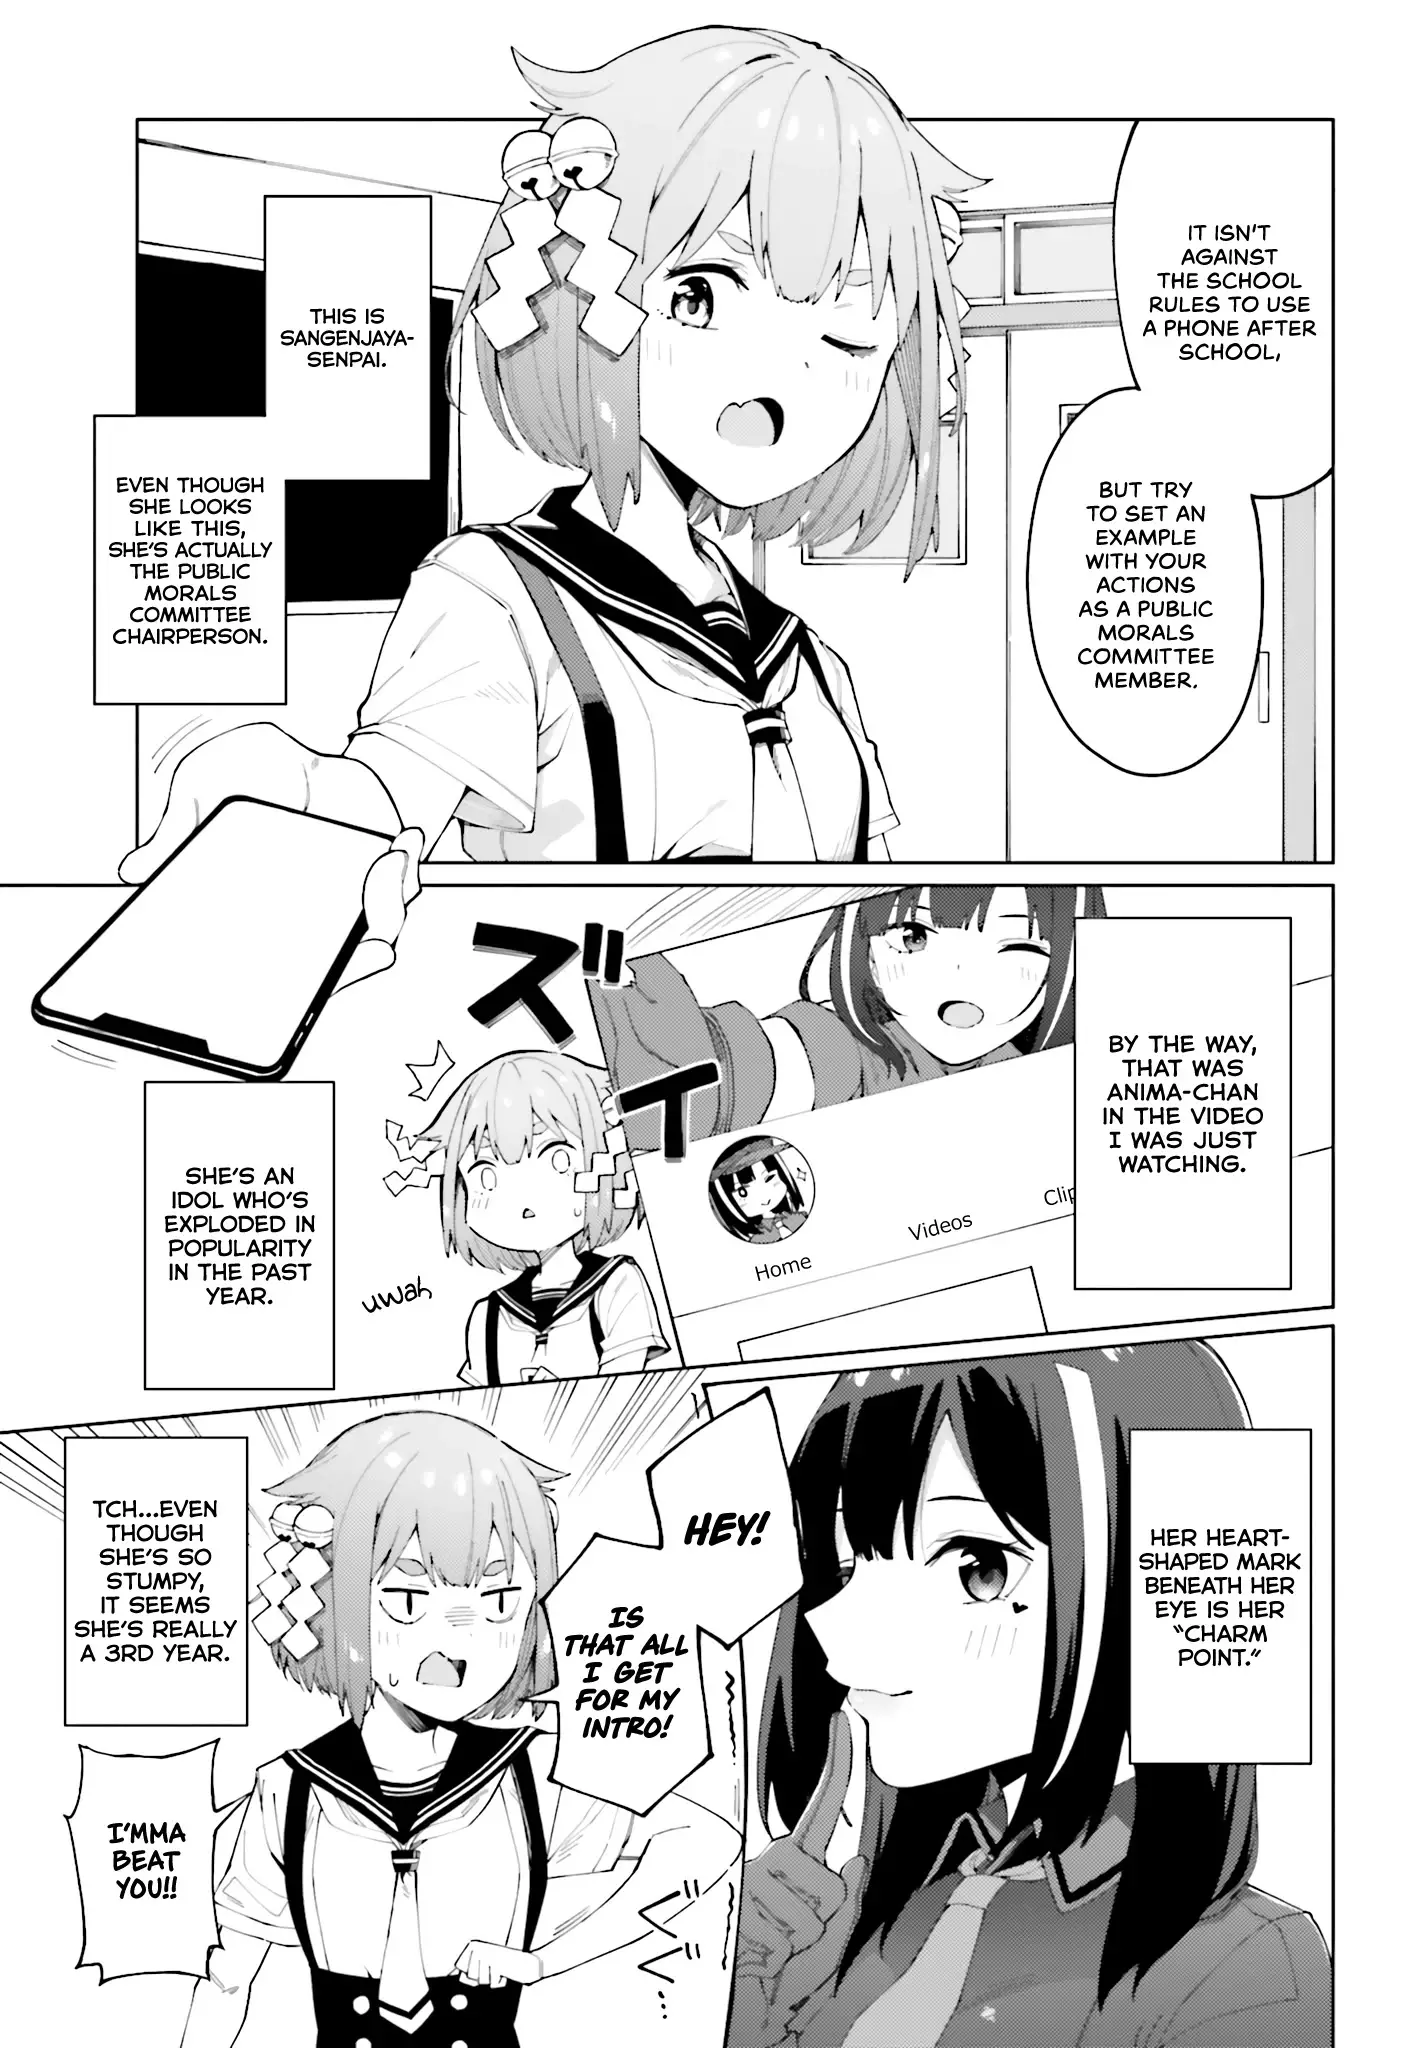 I Don't Understand Shirogane-San's Facial Expression At All - 1 page 4